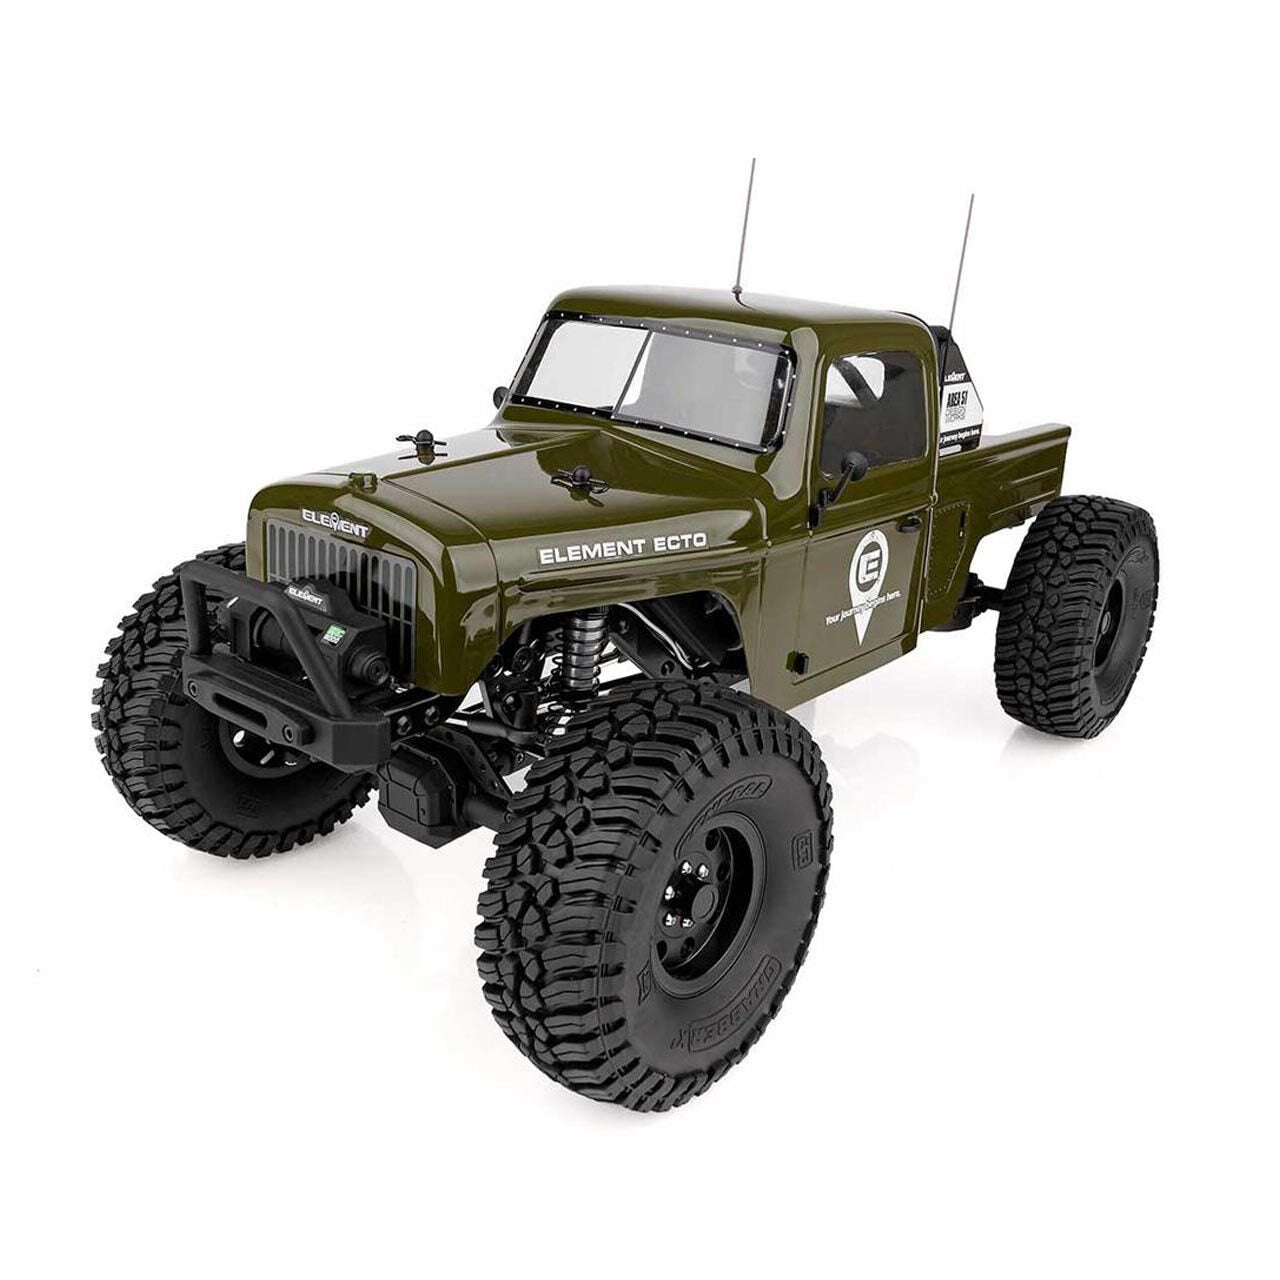 Element RC 1/10 4WD Rock Crawler RTR Enduro Ecto - Assorted Colours